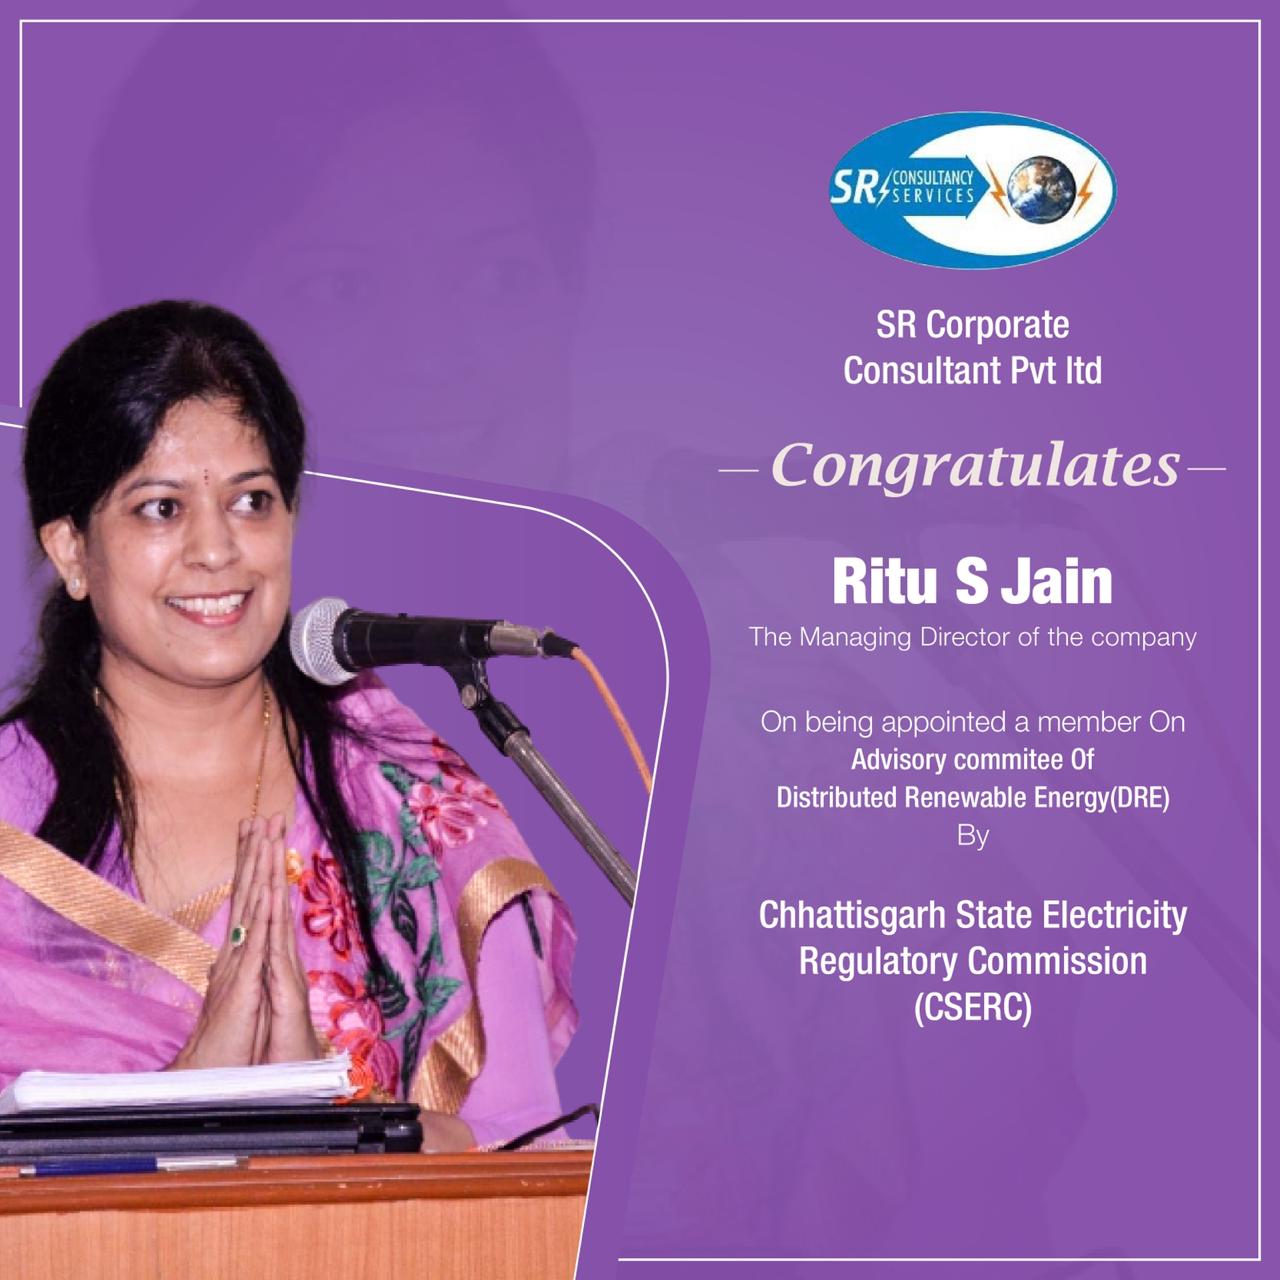 We congratulate our Managing Director of the Company on being appointed a member on Advisory Committee of Distributed Renewable Energy by Chhattisgarh State Electricity Regulatory Commission(CSERC)